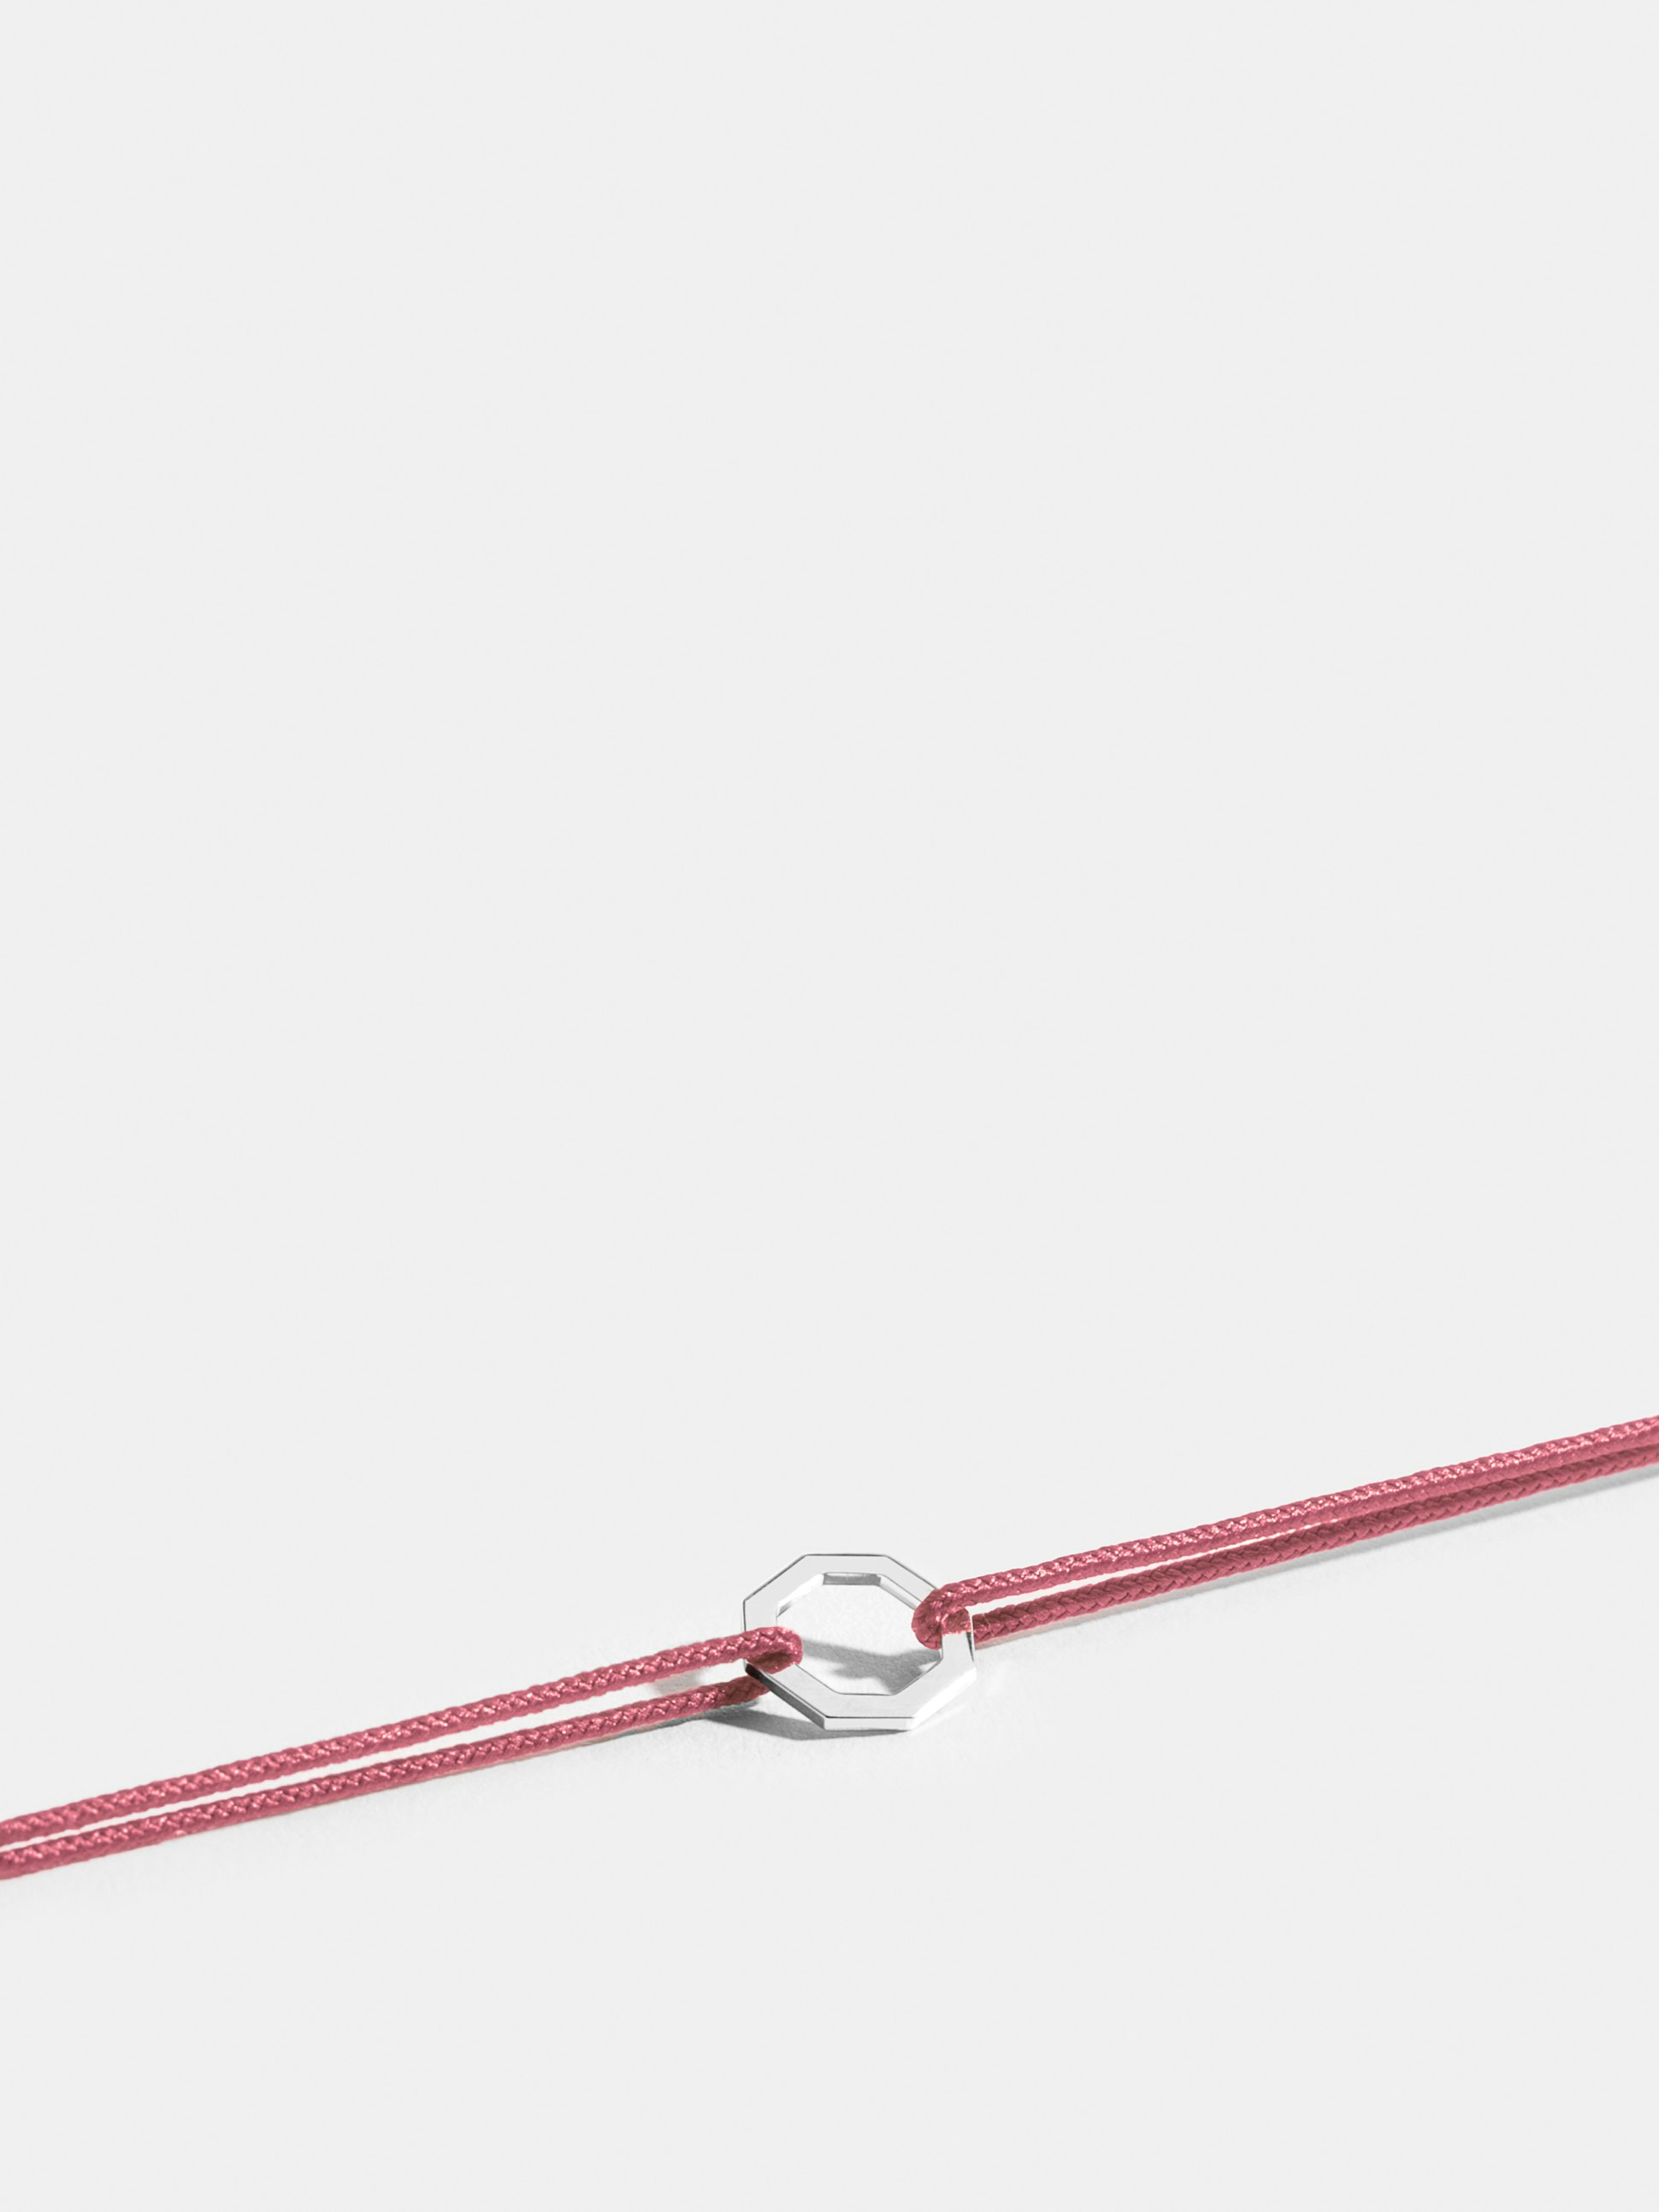 Octogone motif in 18k Fairmined ethical white gold, on an antique pink cord. 